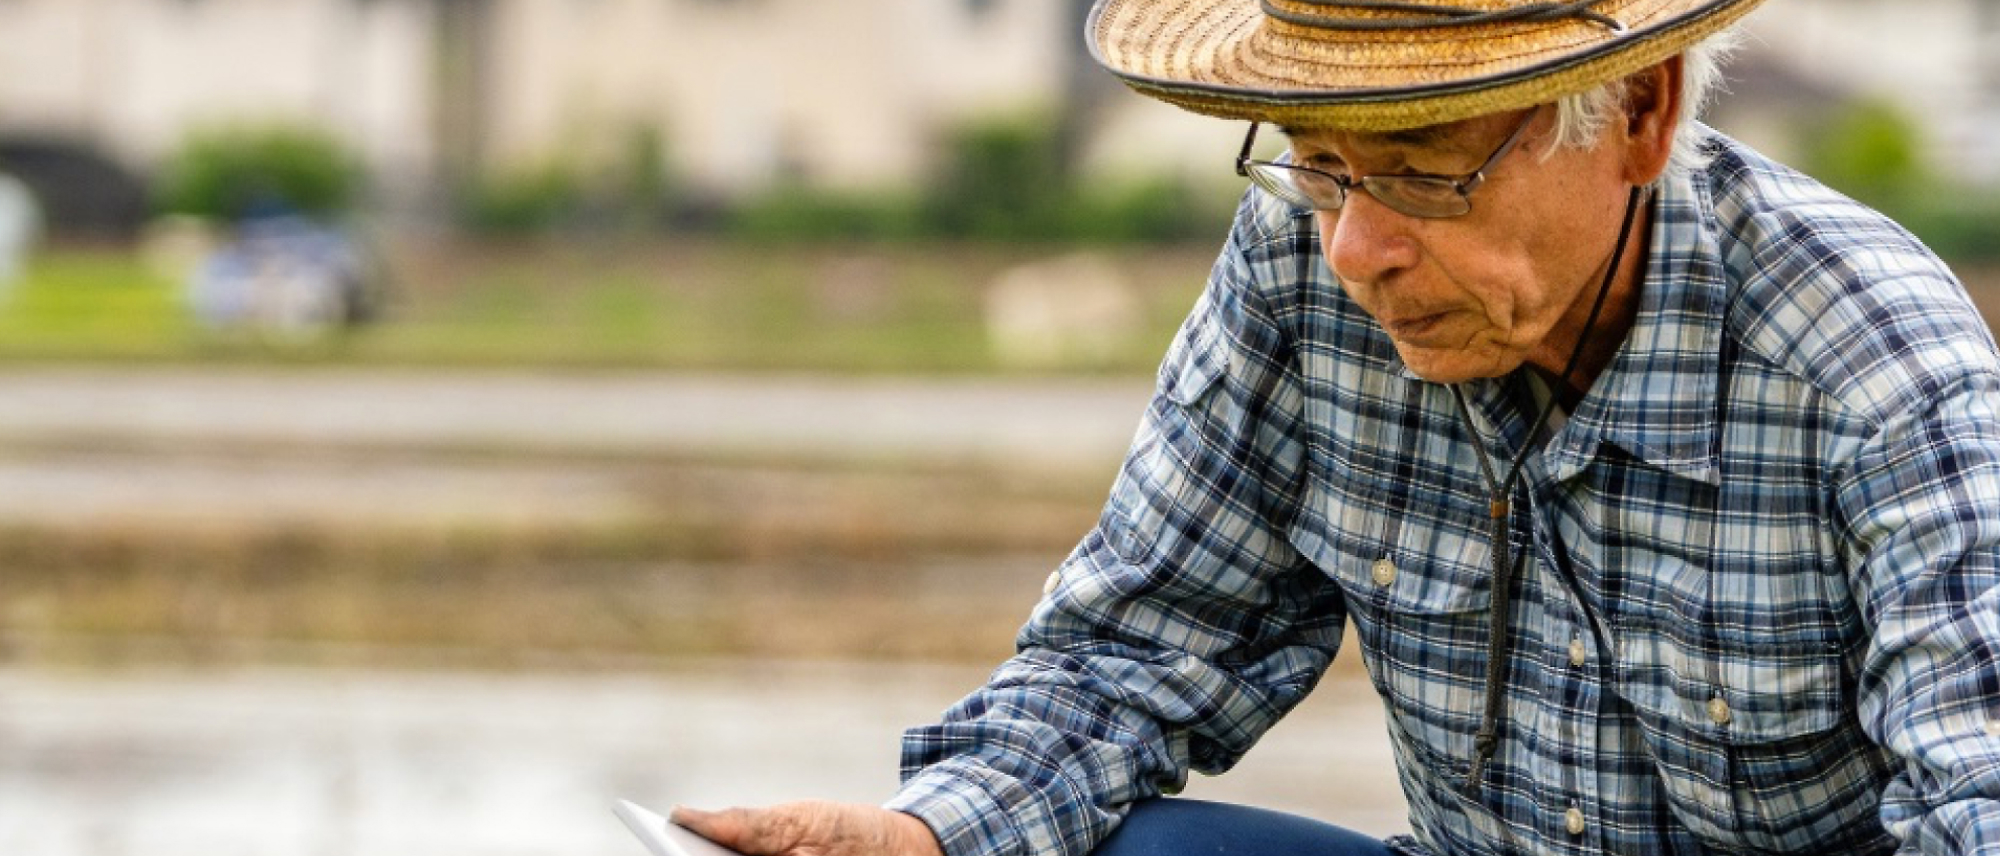 An elderly person closely examining a tablet screen in a rural setting.